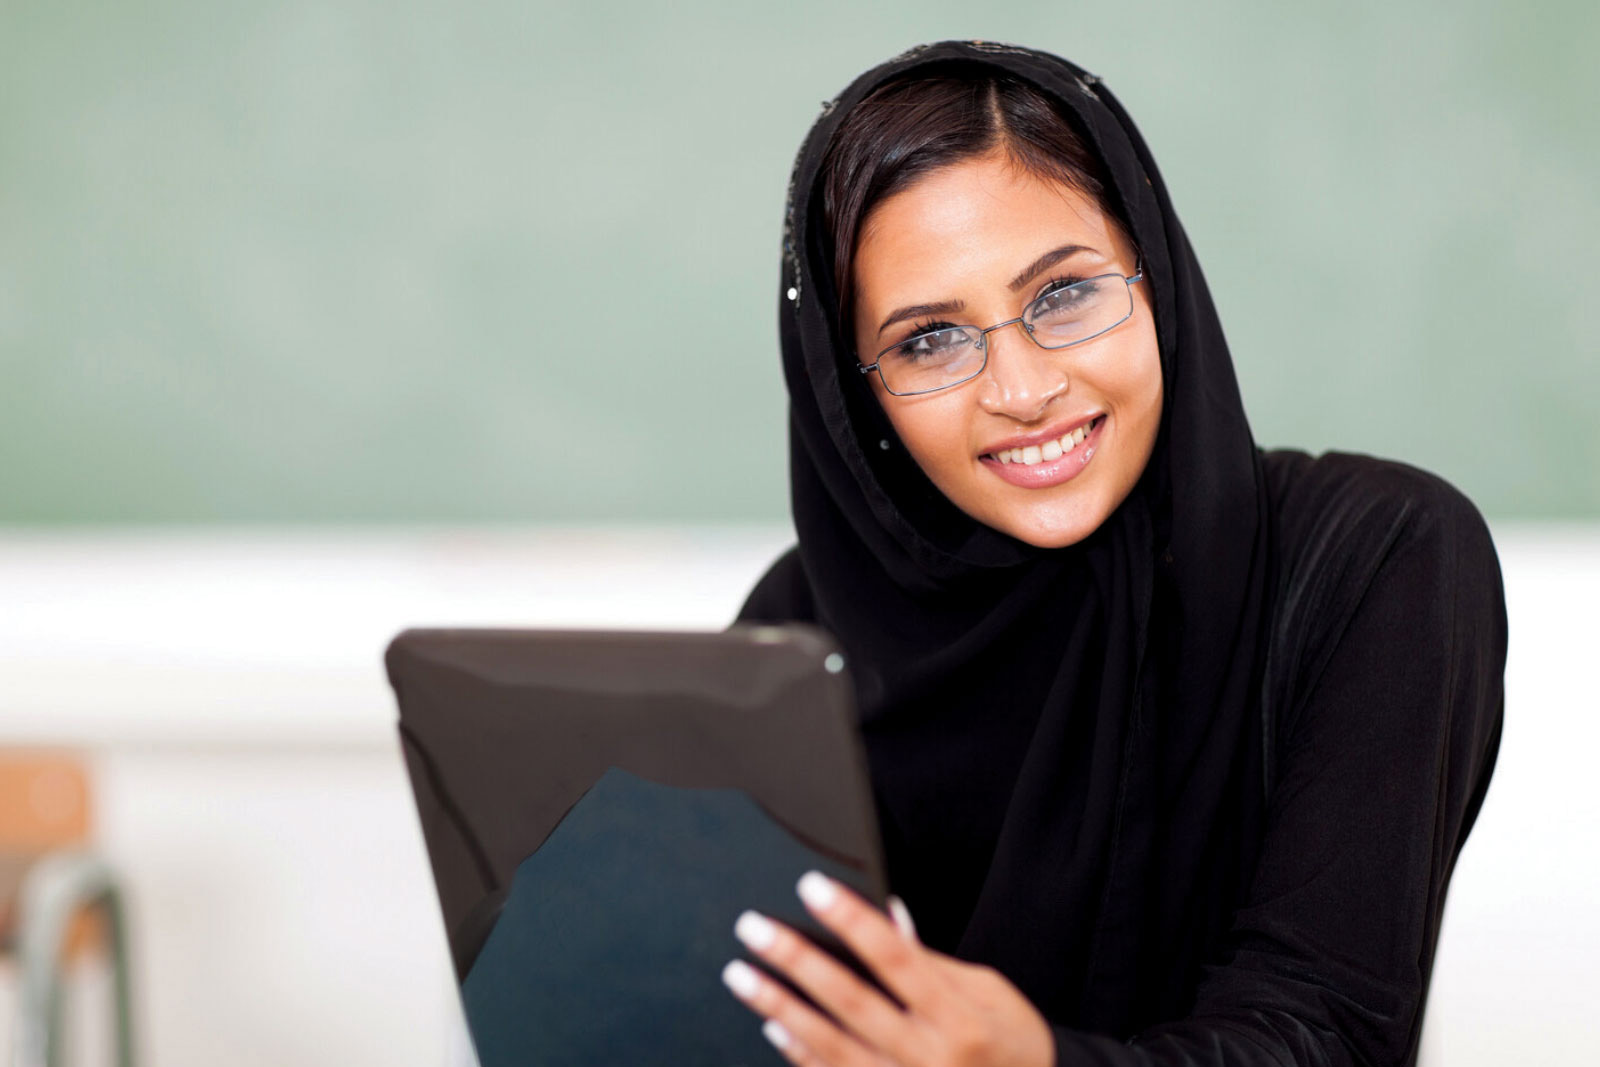 Smiling woman in a hijab holding an iPad